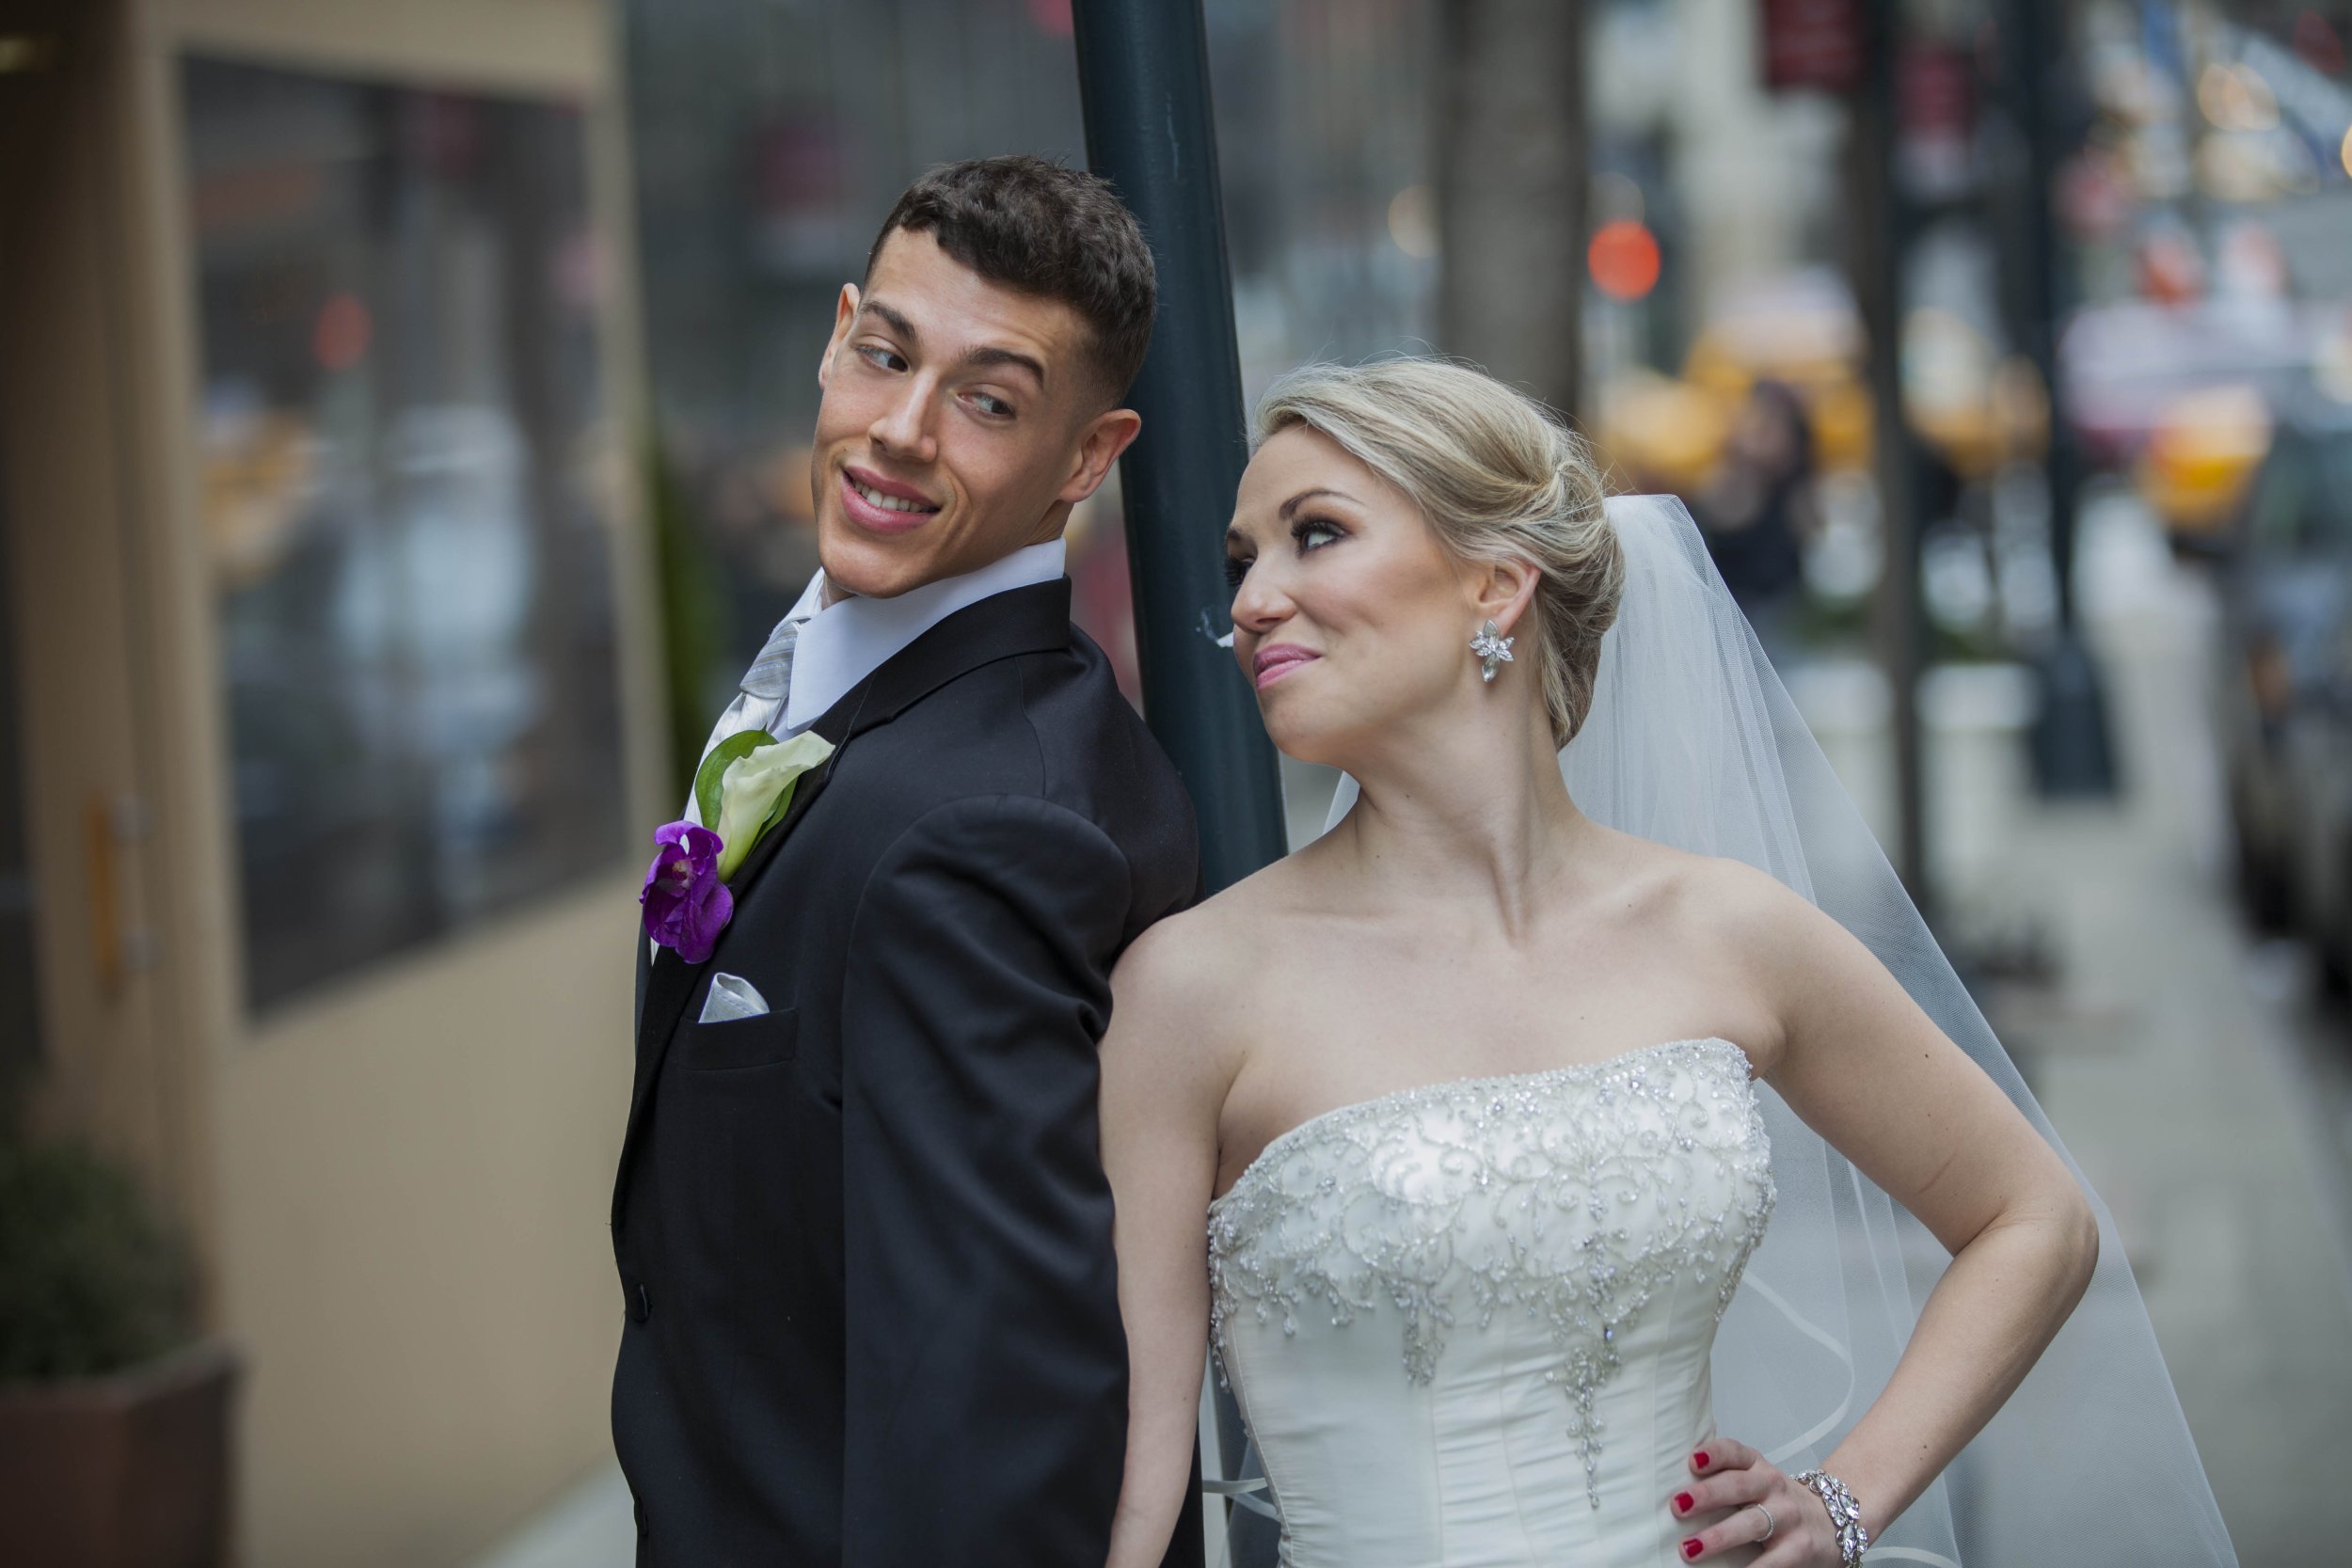 ‘Married At First Sight’ Season 1 Spoilers 2 Couples Panic During